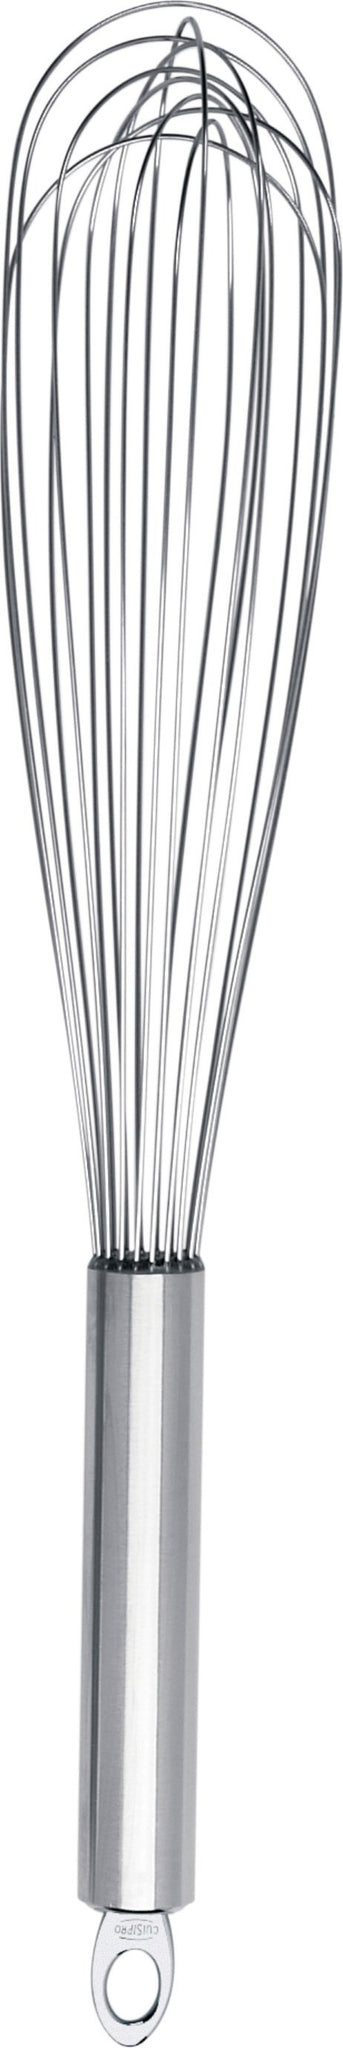 Cuisipro - 12" Stainless Steel Egg Whisk (10 Wires) - 74767299